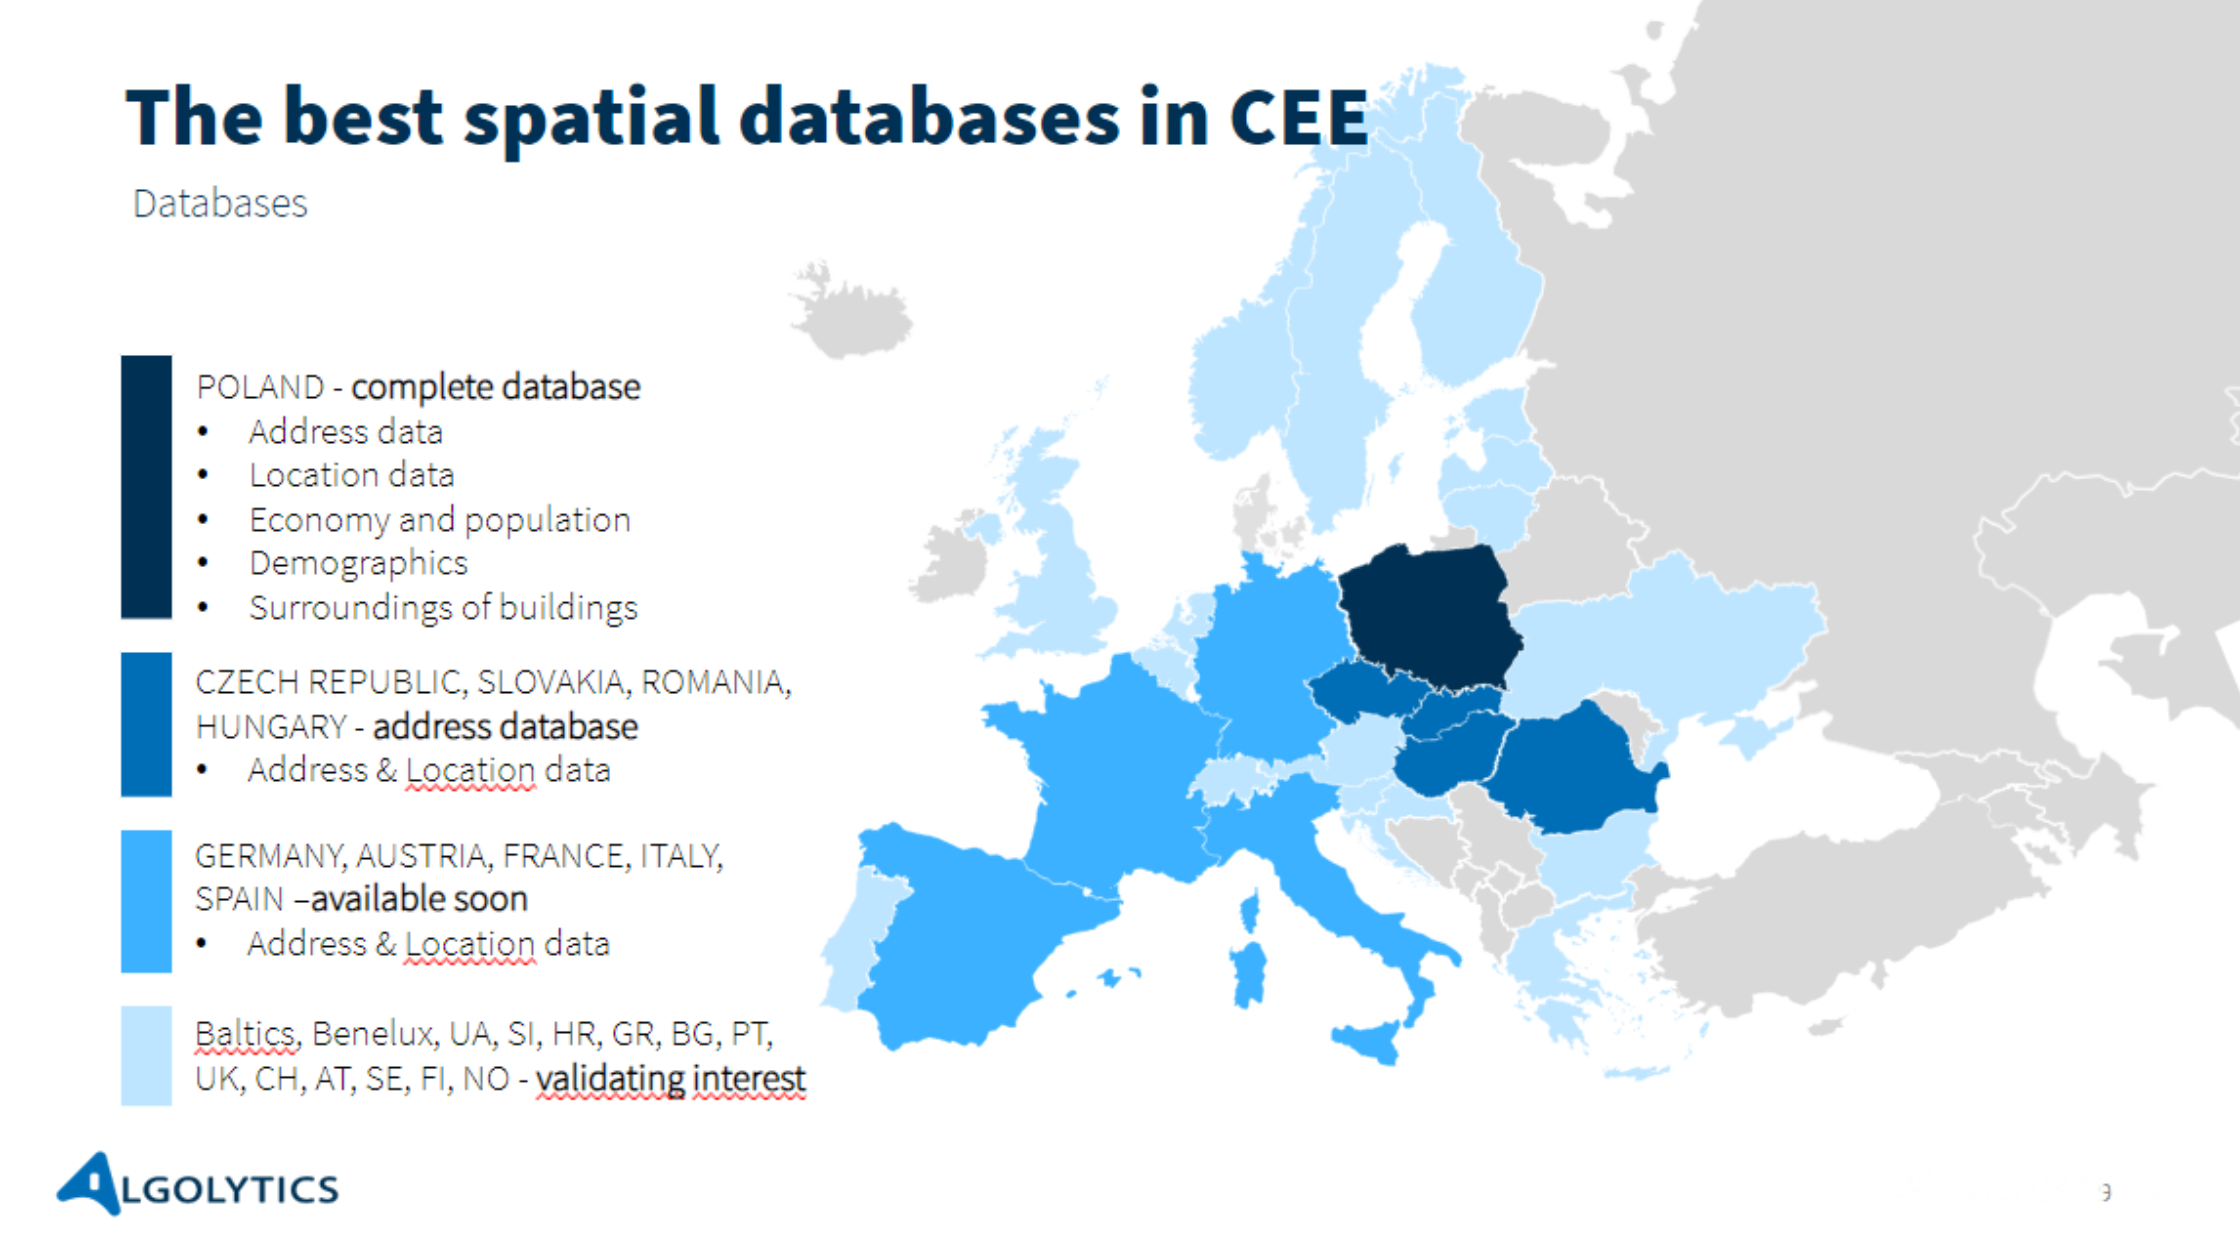 The best spatial databases in CEE